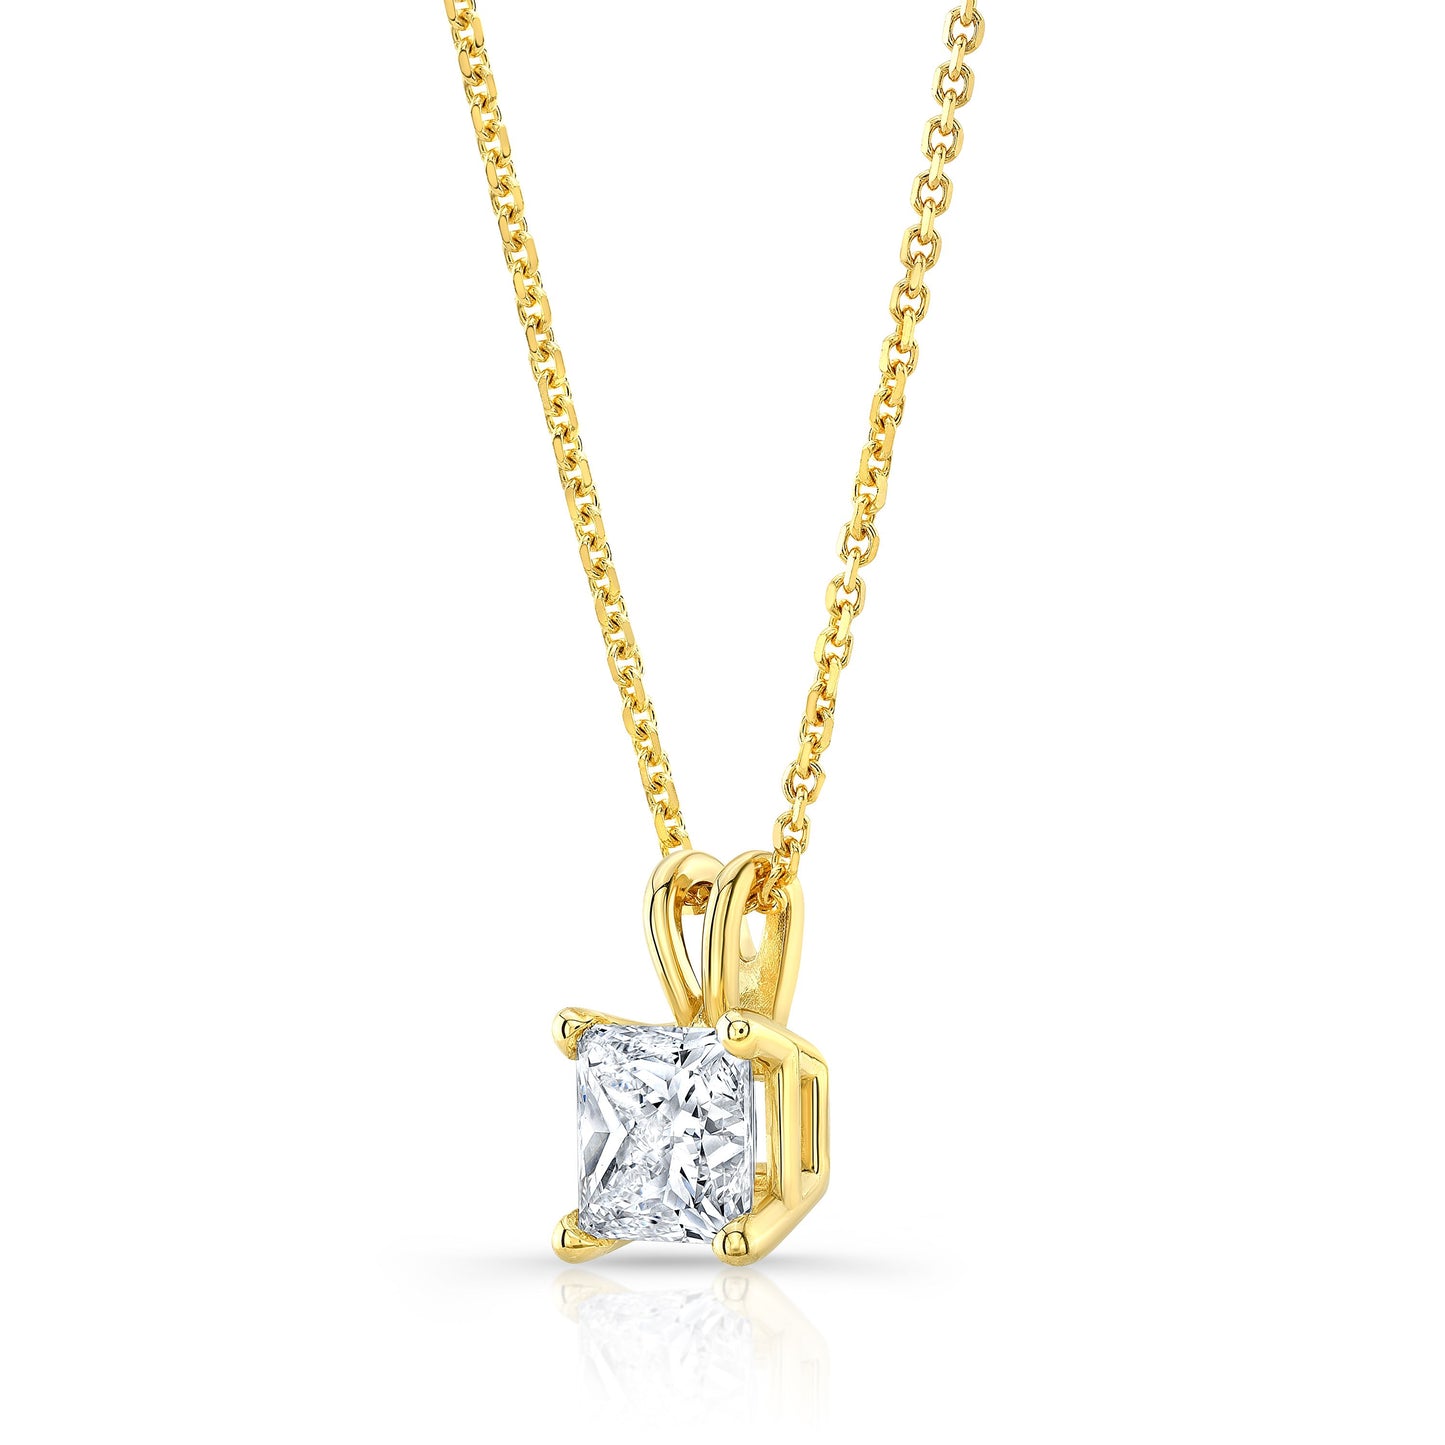 Princess Diamond Solitaire Pendant In A 14k Yellow Gold 4-prong Basket Setting, 1.25ct. T.w. (hi, Si1-si2)